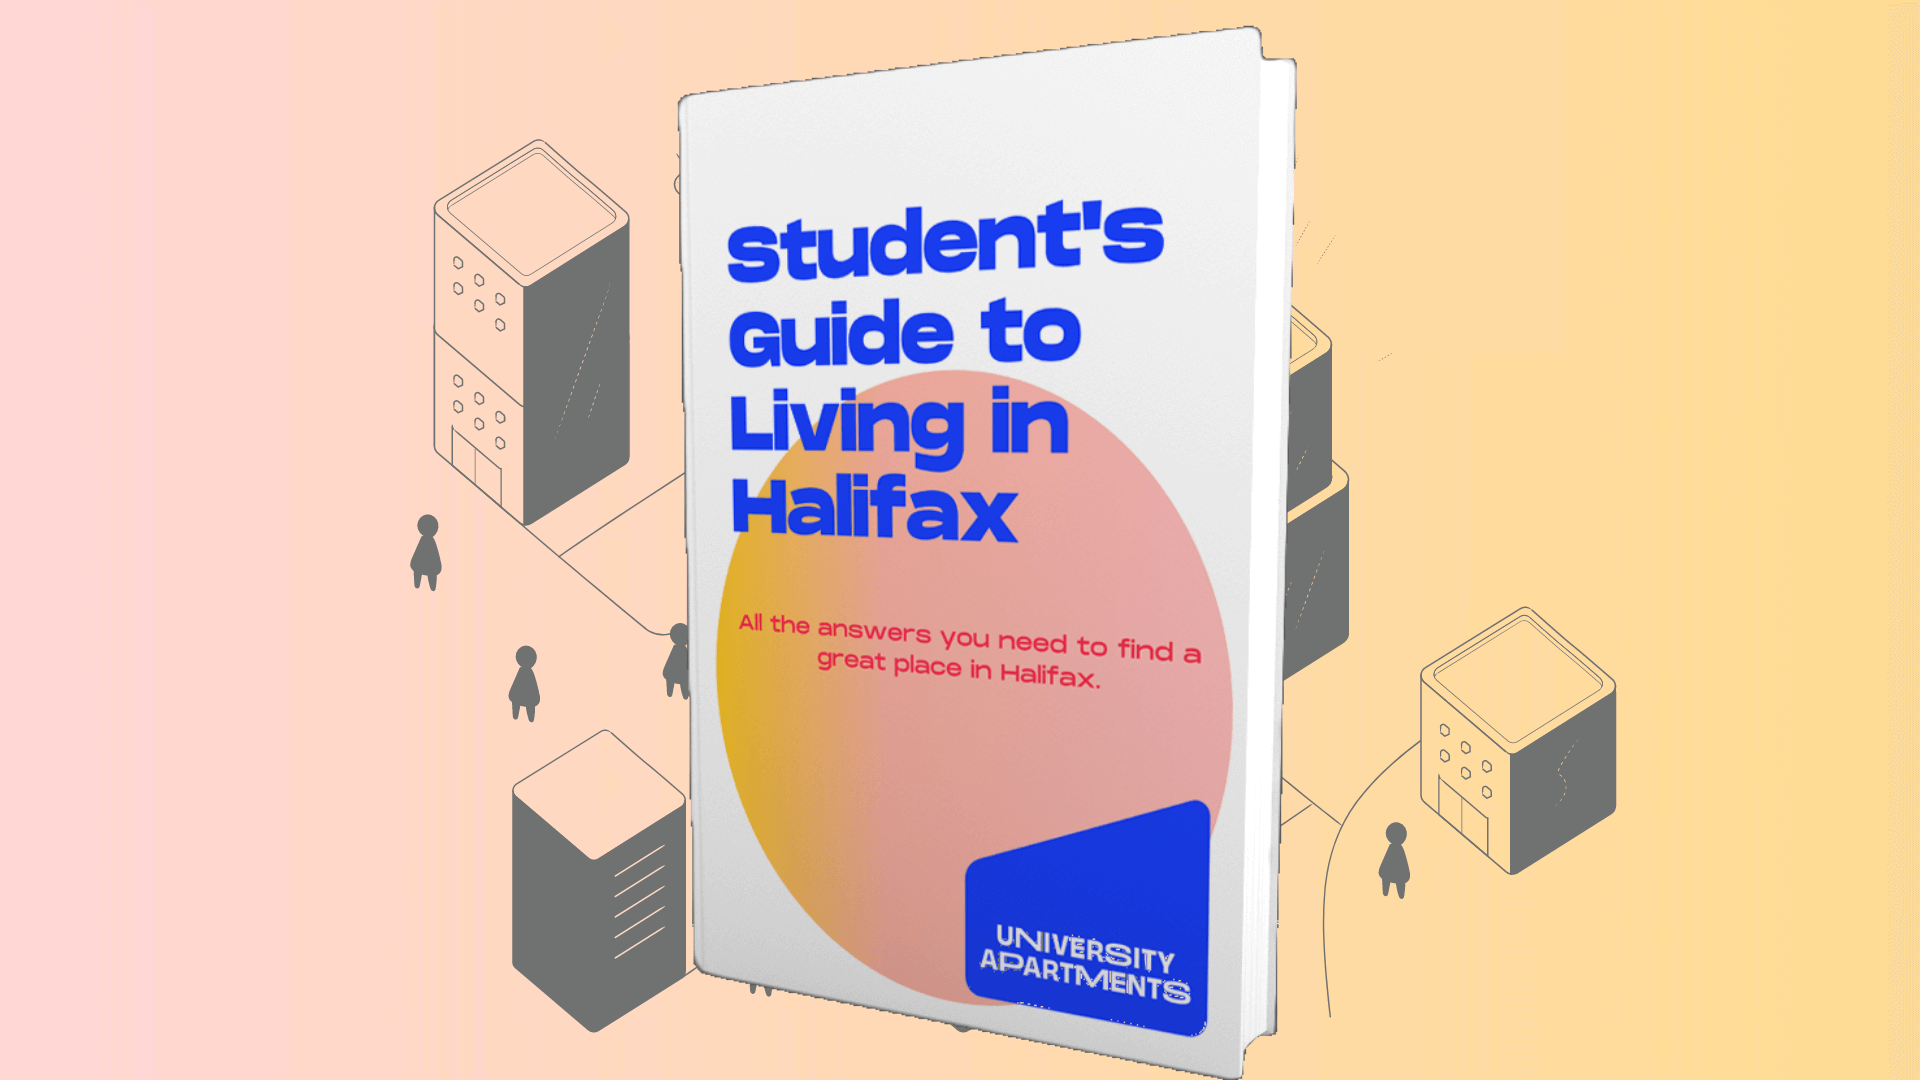 Halifax student guide